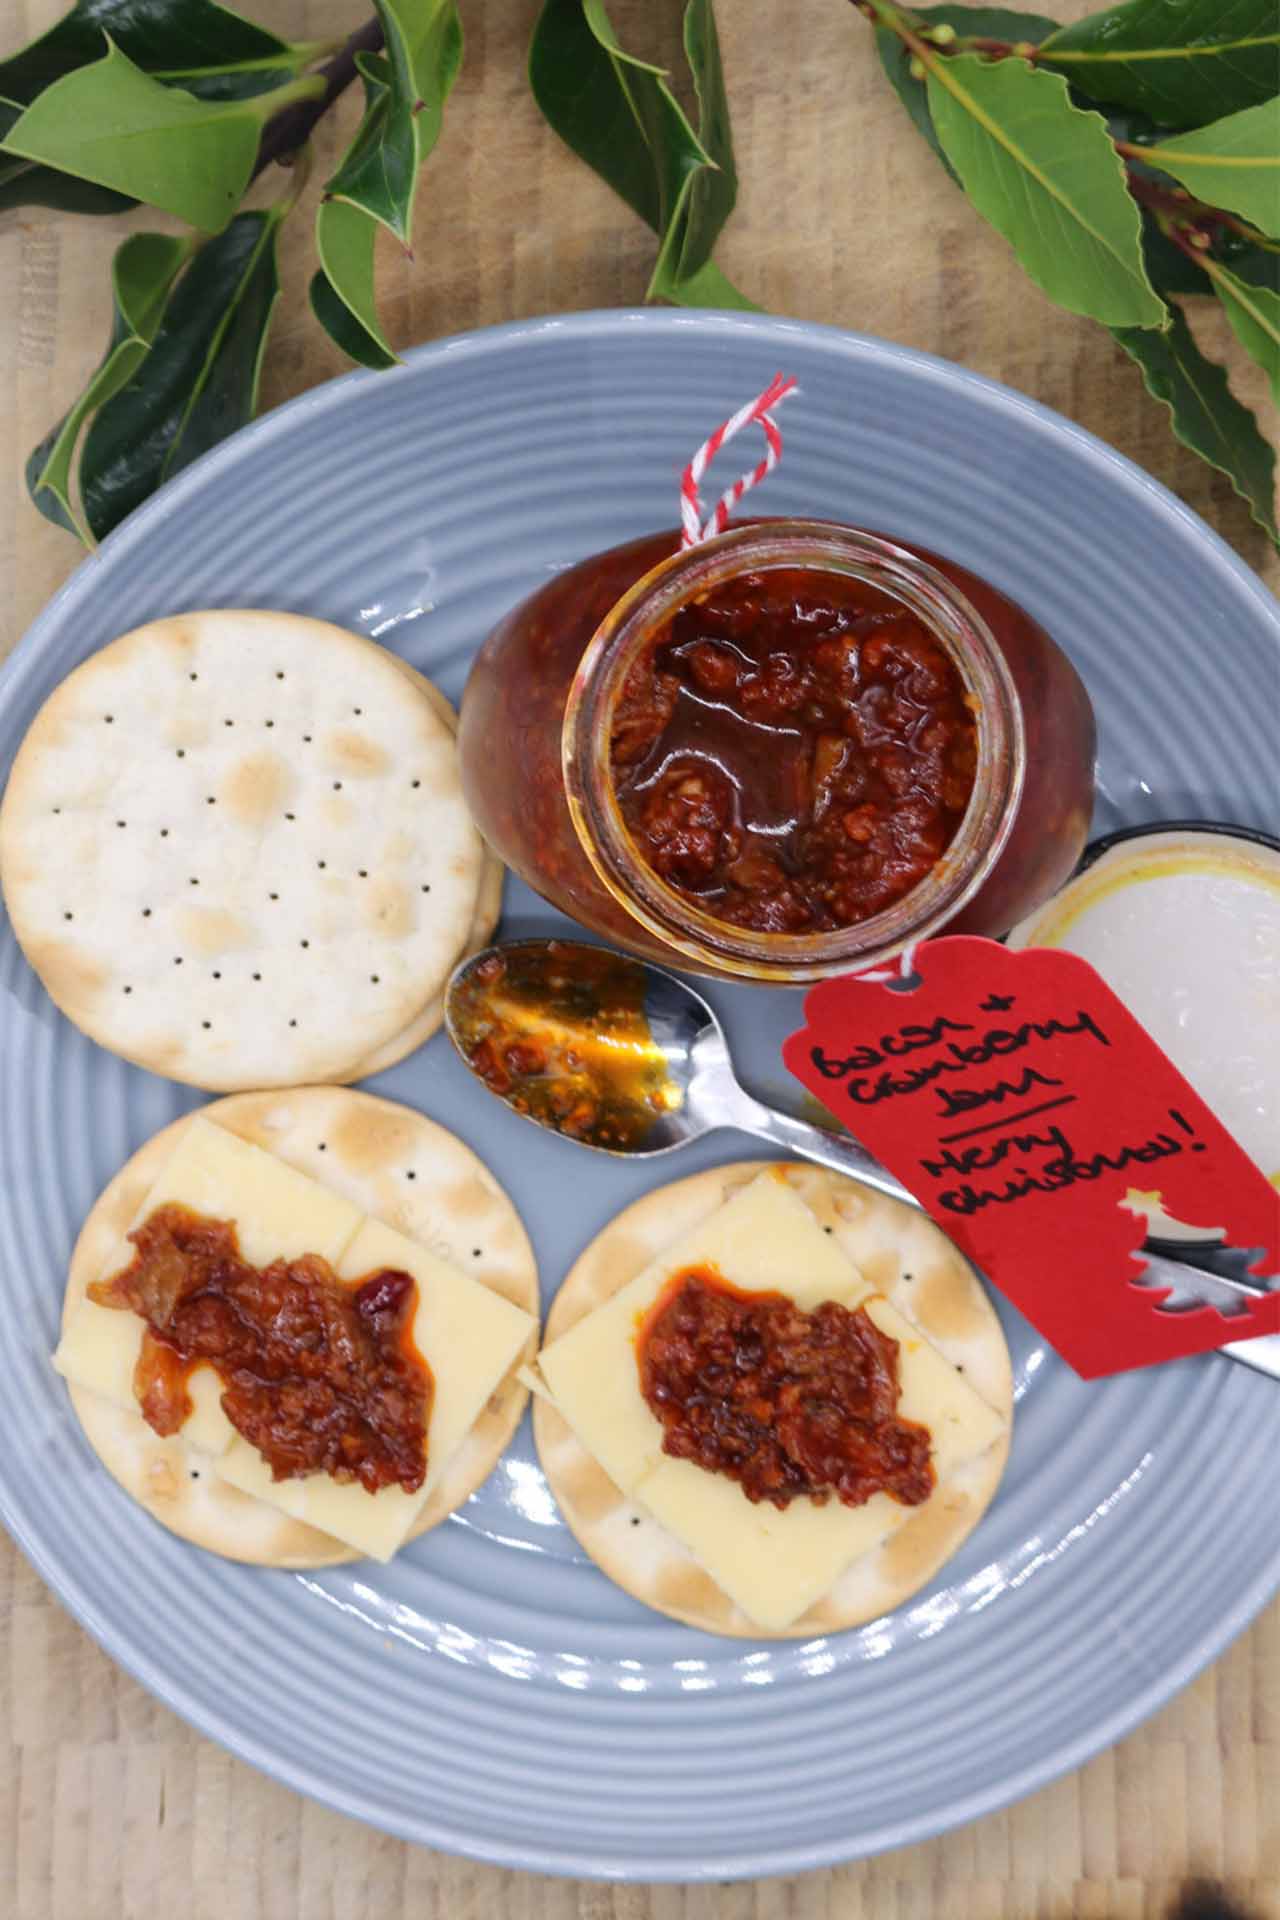 Bacon and Cranberry Jam (Thermomix), Bacon and Cranberry Jam (Thermomix)